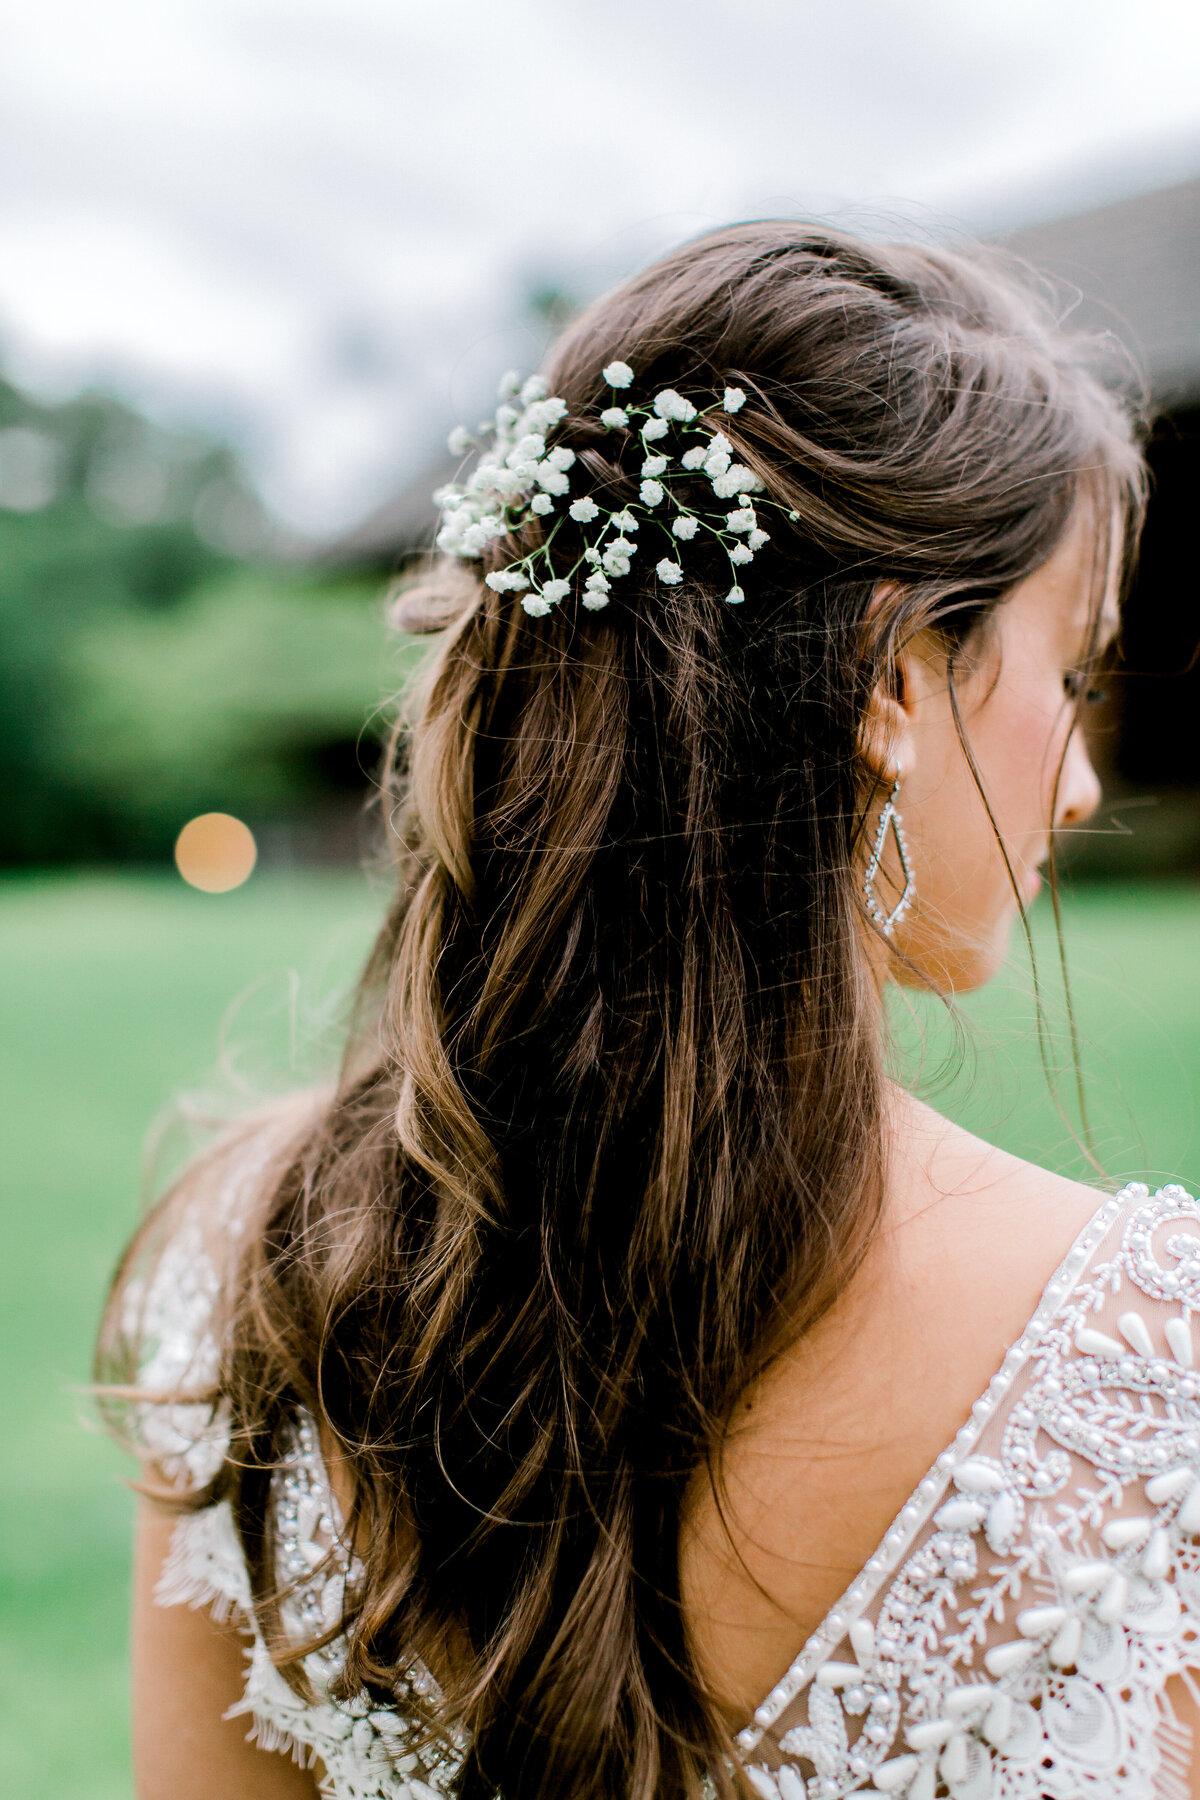 Photograph highlighting the bride's simple yet elegant hairstyle, complementing her overall bridal look with grace and sophistication.